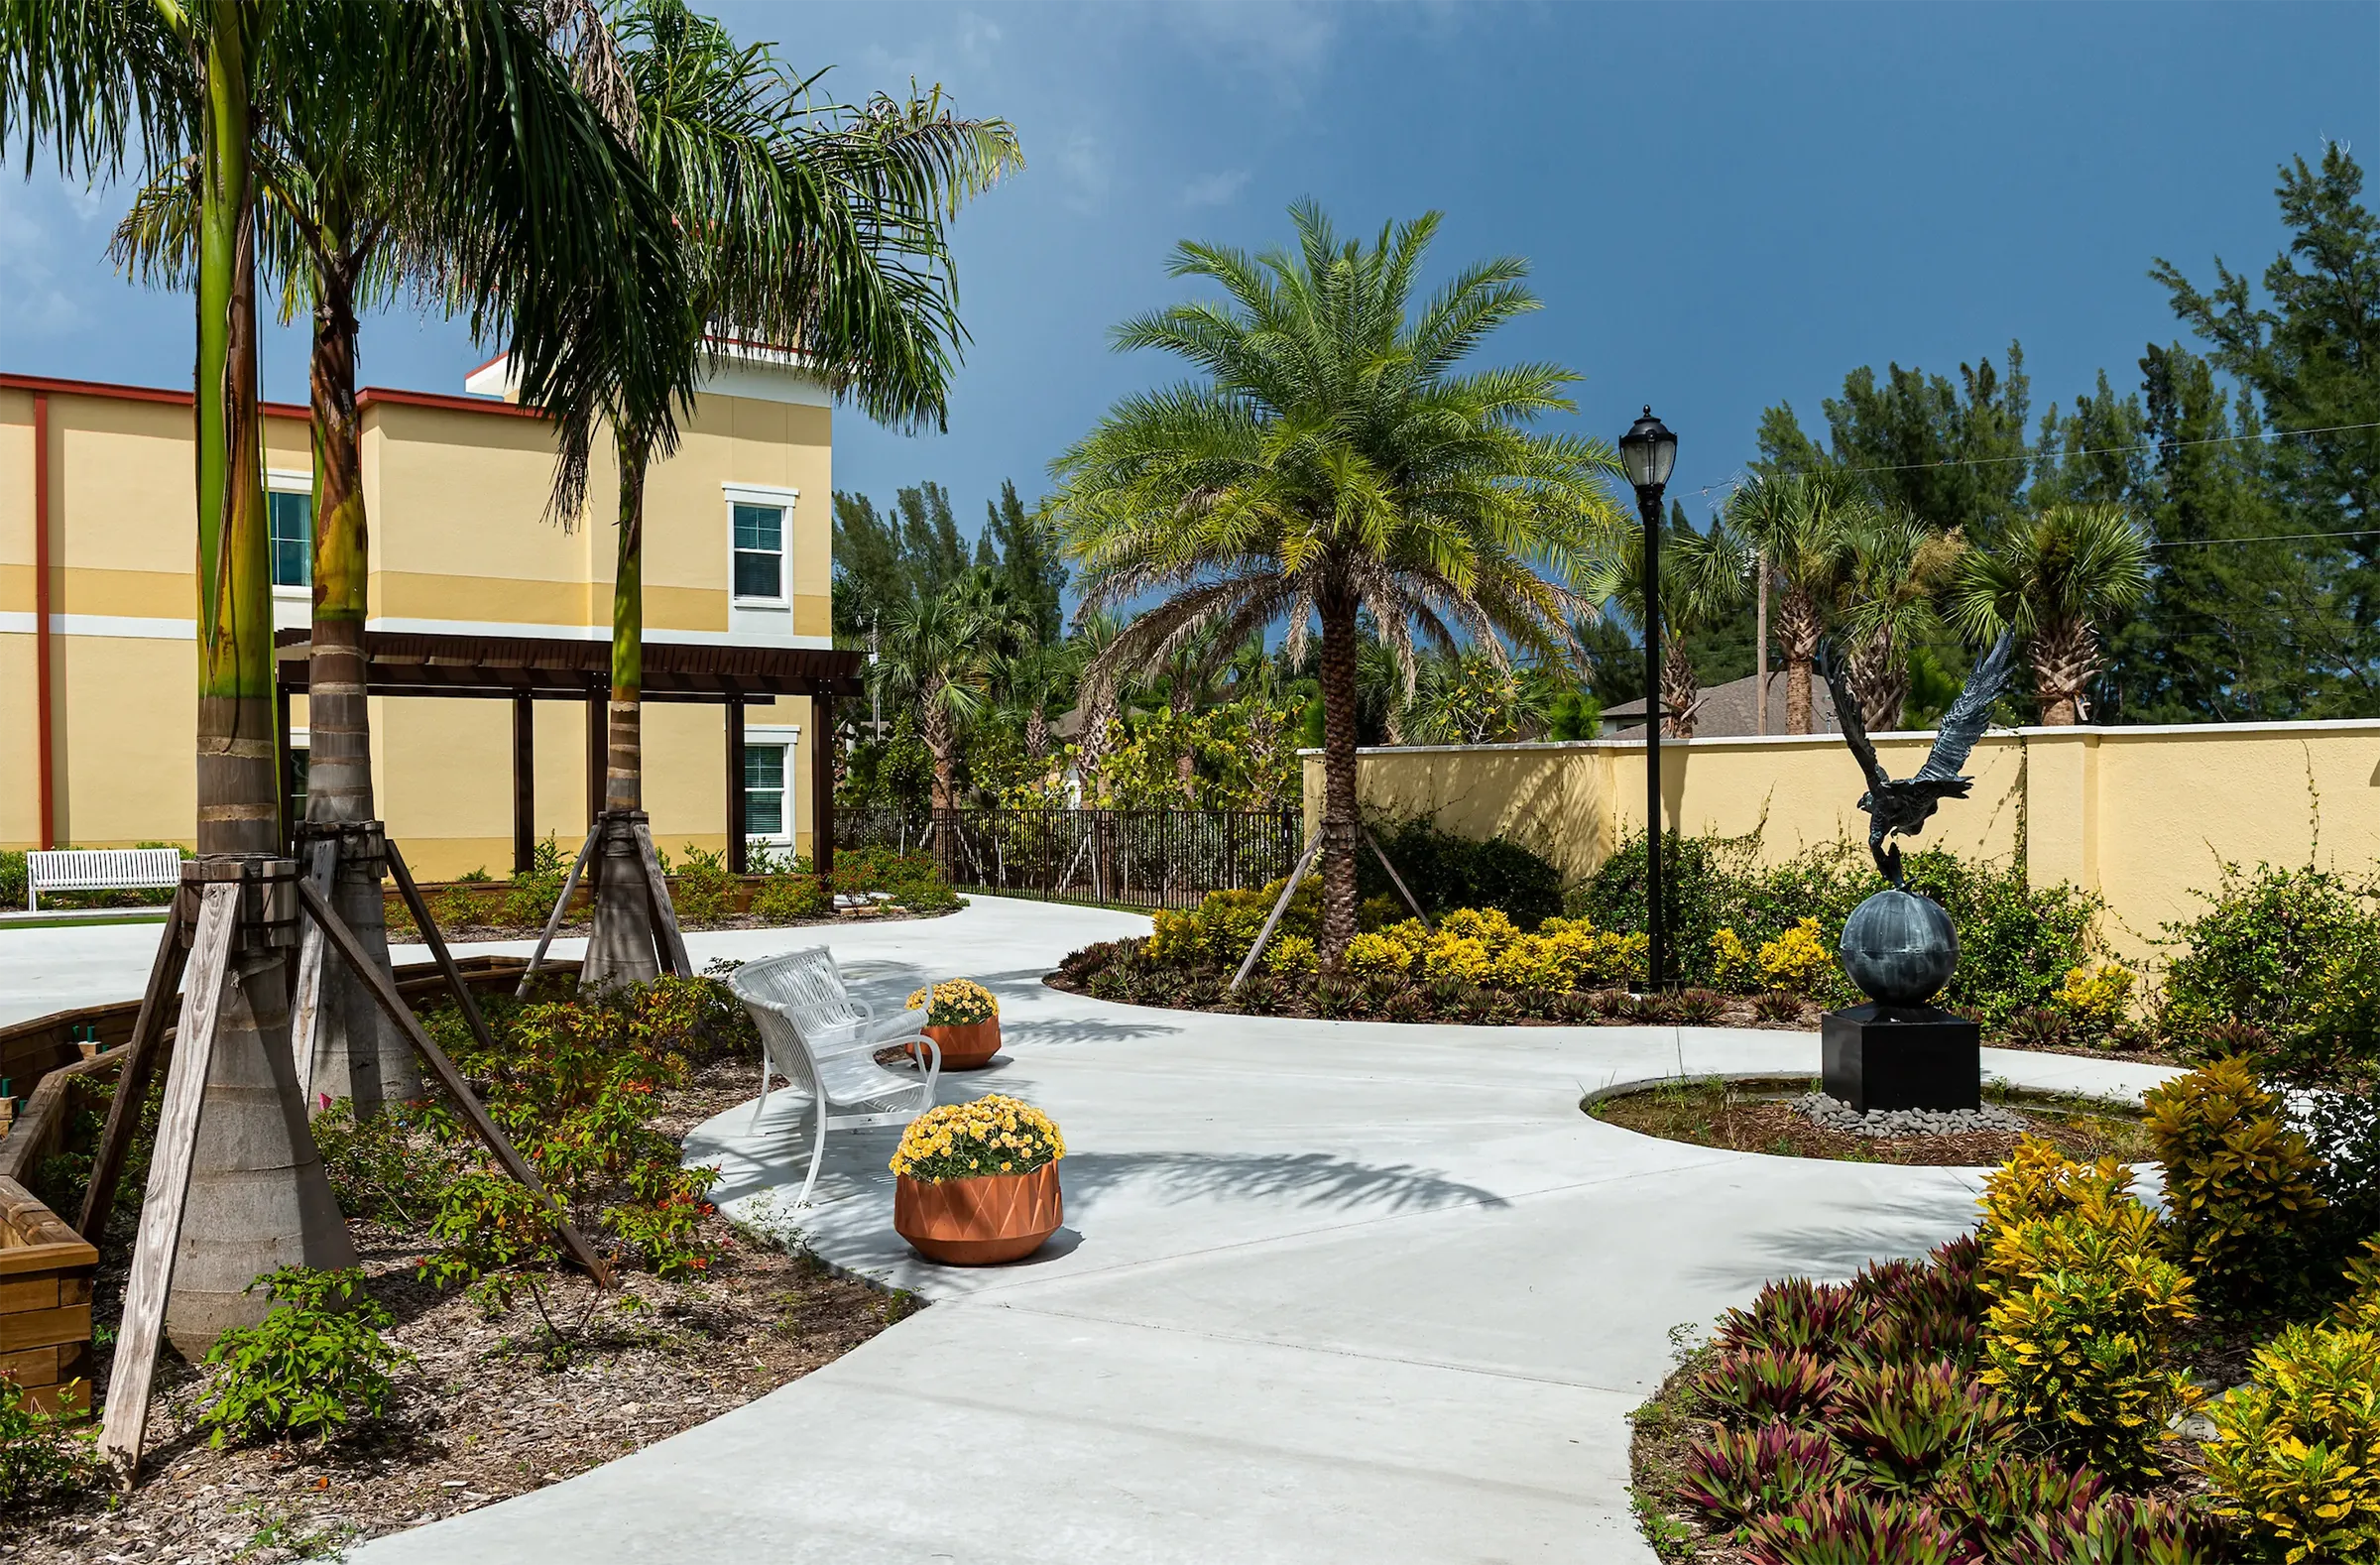 A courtyard with palm trees and a sculpture of a bird at The Gallery at Cape Coral.